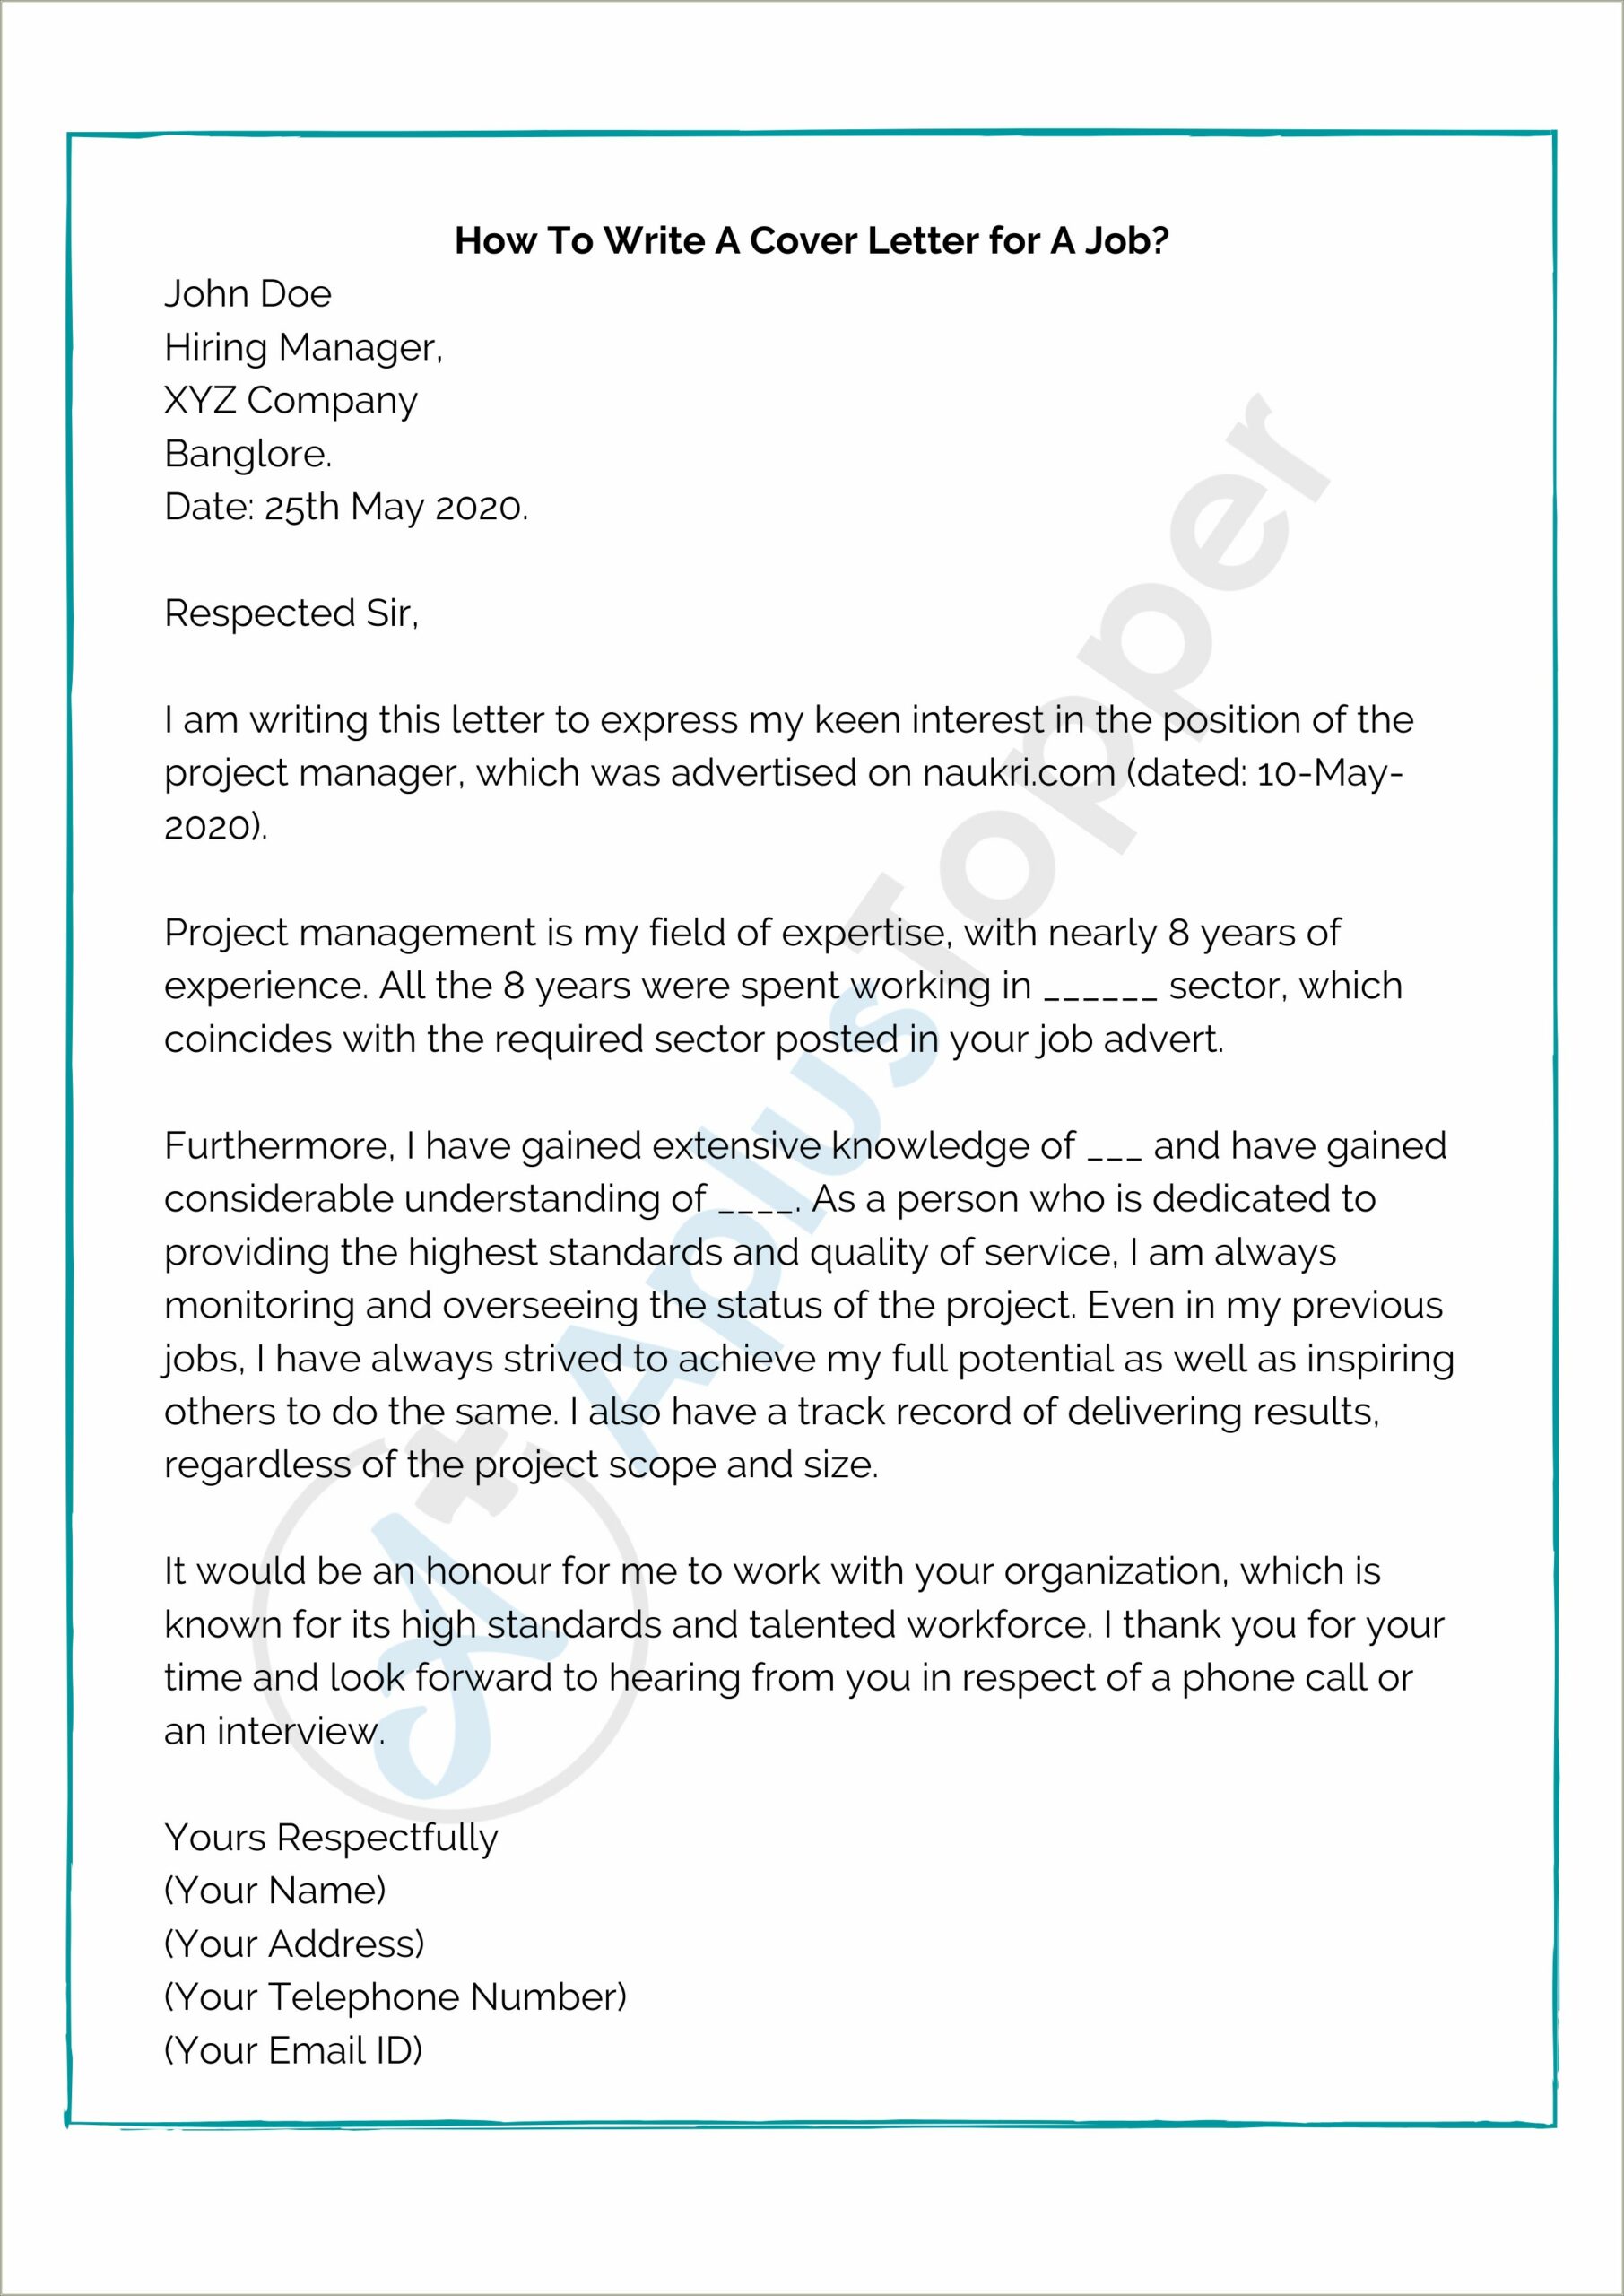 Respectful Closing To A Resume Cover Letter